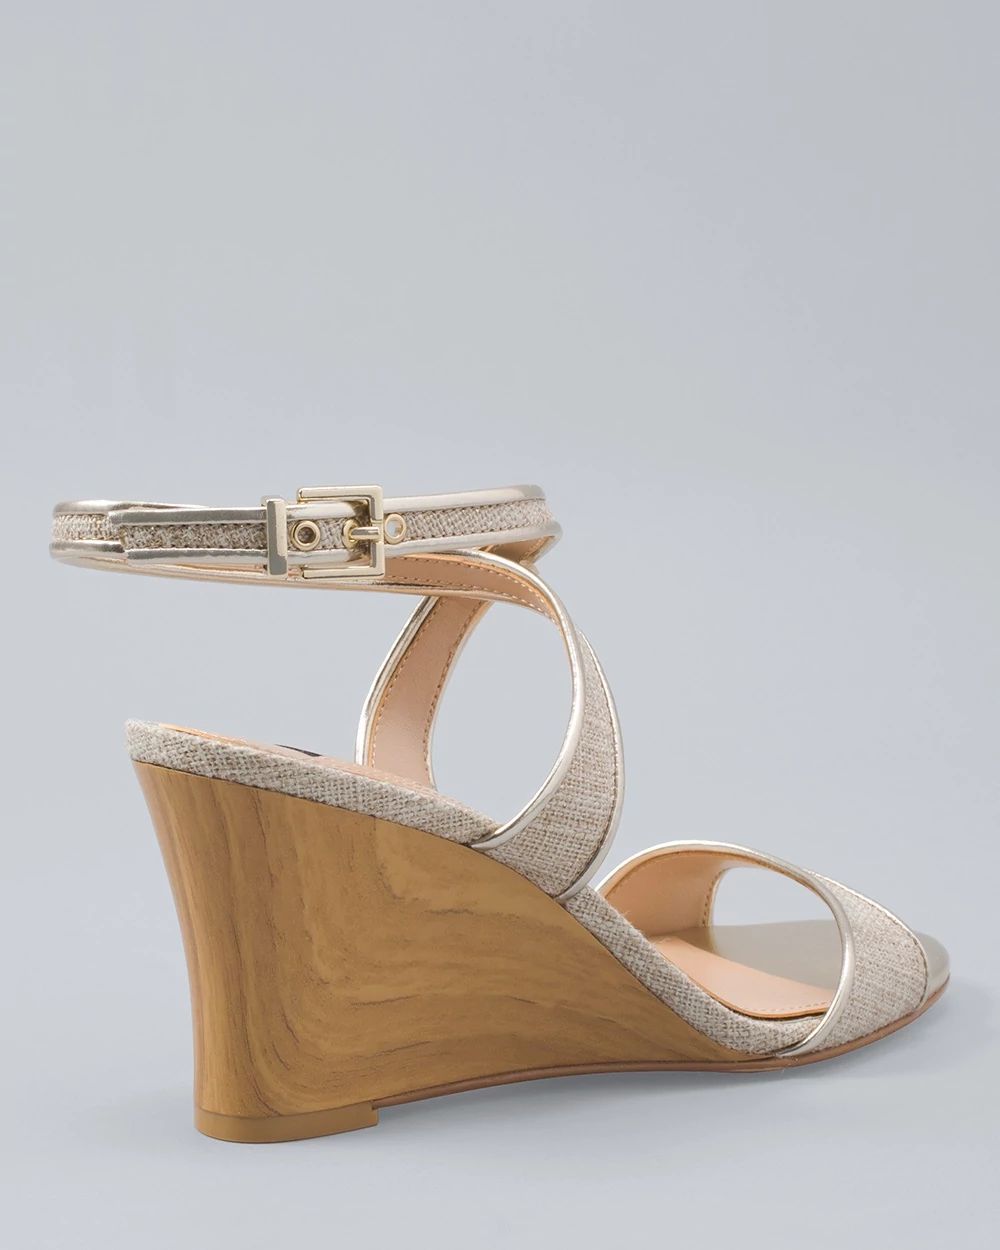 Metallic-Trim Linen Wedges click to view larger image.